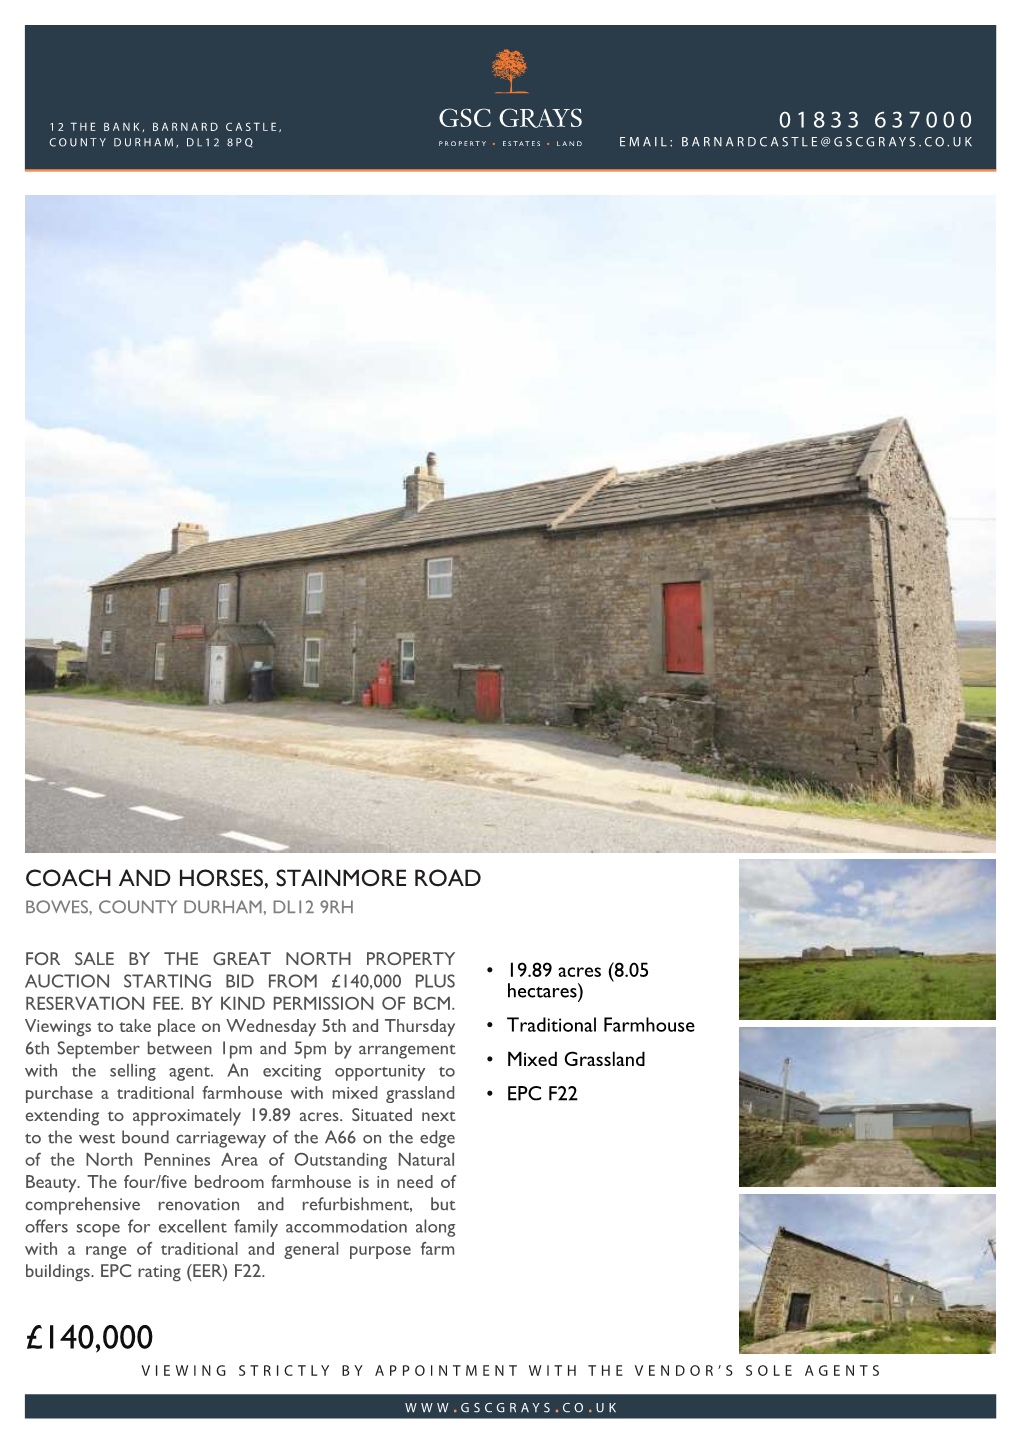 £140,000 PLUS Hectares) RESERVATION FEE